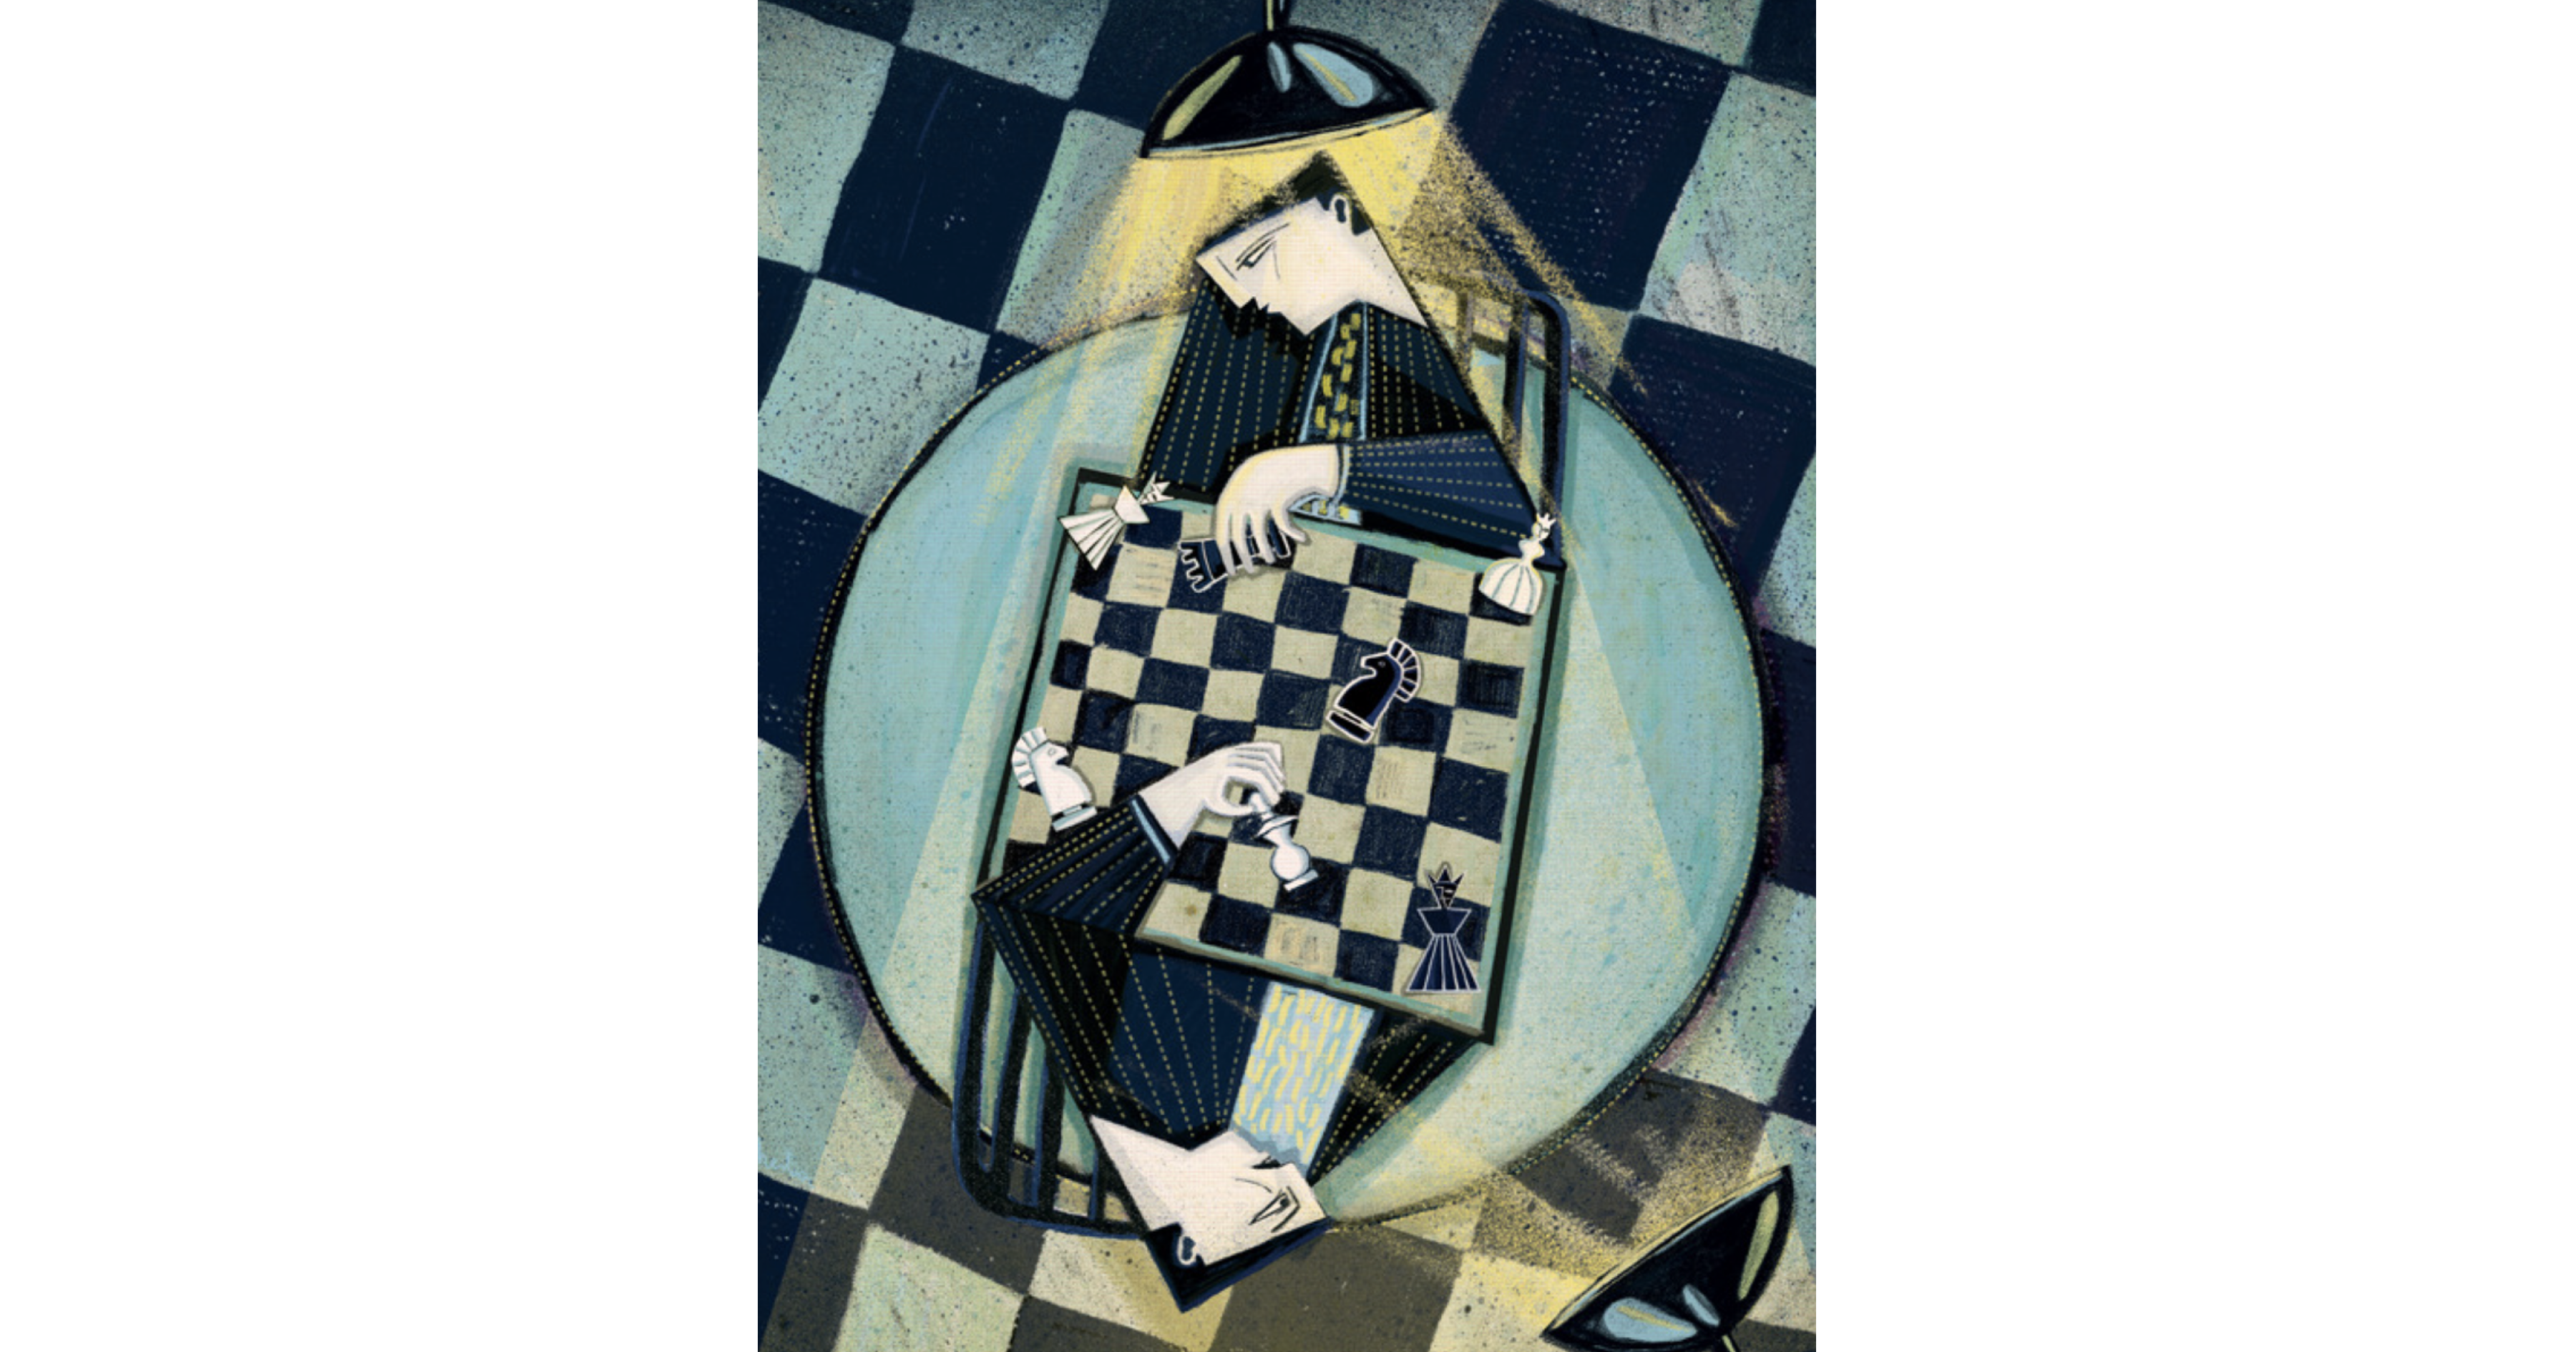 2-dimensional men playing chess against each other